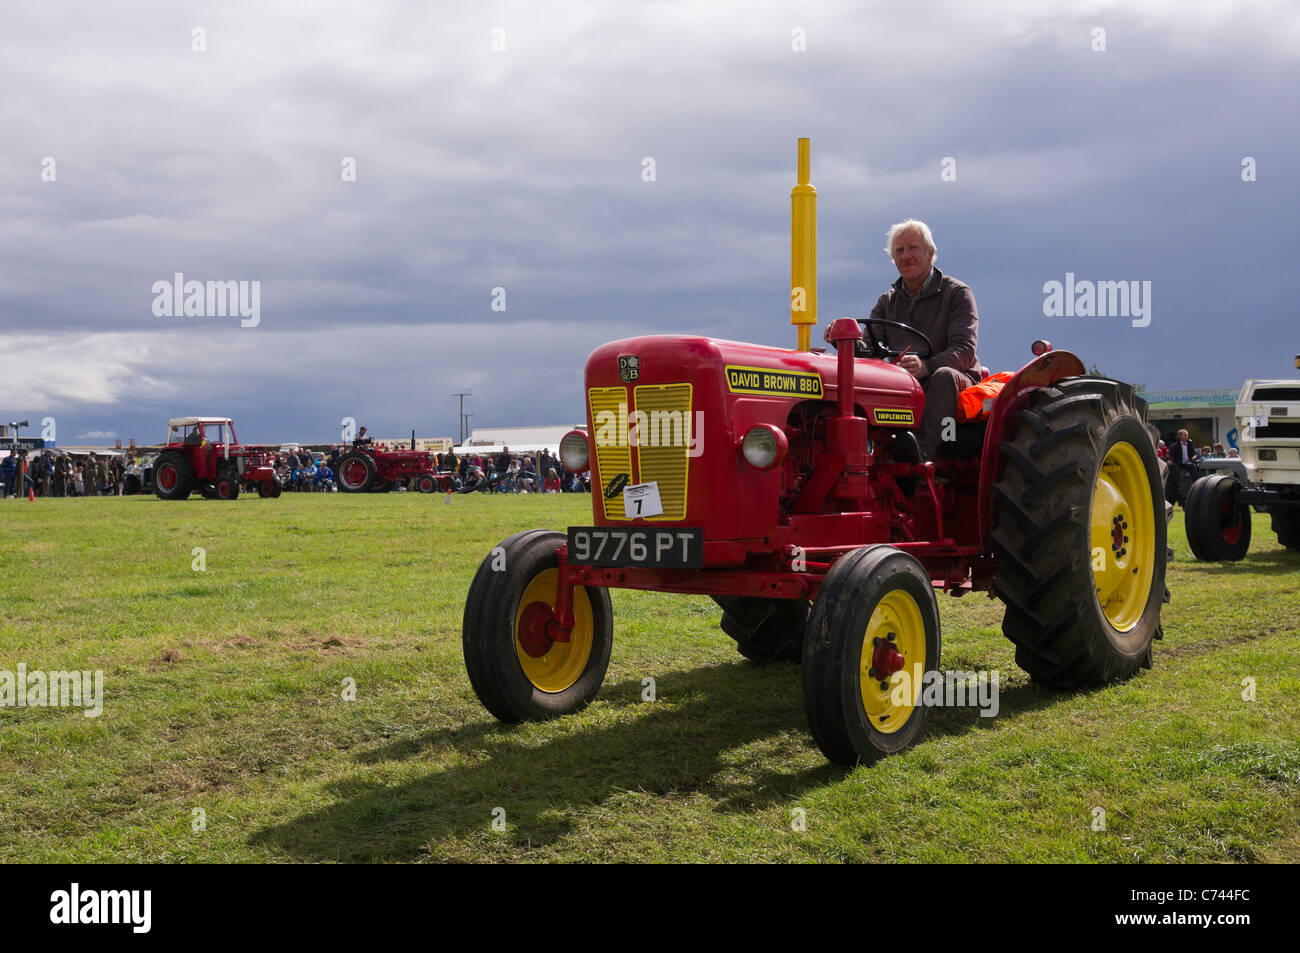 David Brown 880 Implematic tractor photographed in the parade ring at Wensleydale Agricultural Show, 2011 Stock Photo